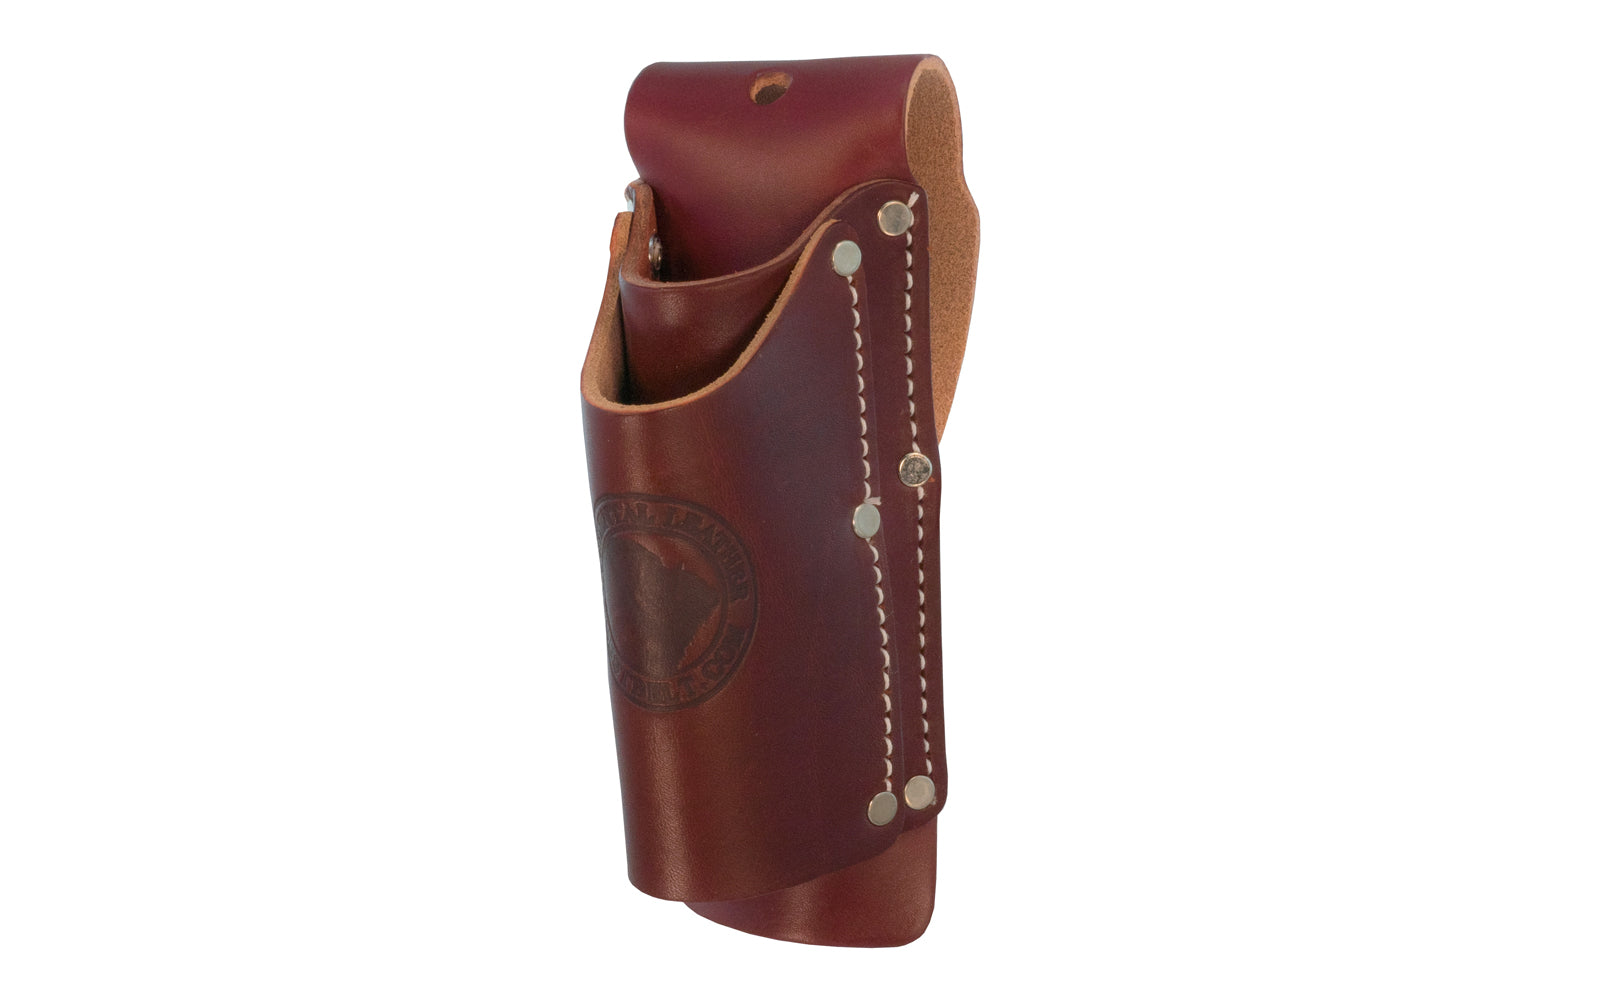 Occidental Leather Double Snip Holder Holster ~ 5030. This Double Snip Holder Holster holds two snips. Great for better tool organization. Designed for steel framing & many other applications. Belt worn product fits up to a 3" belt. 759244084306.   Made in USA. 